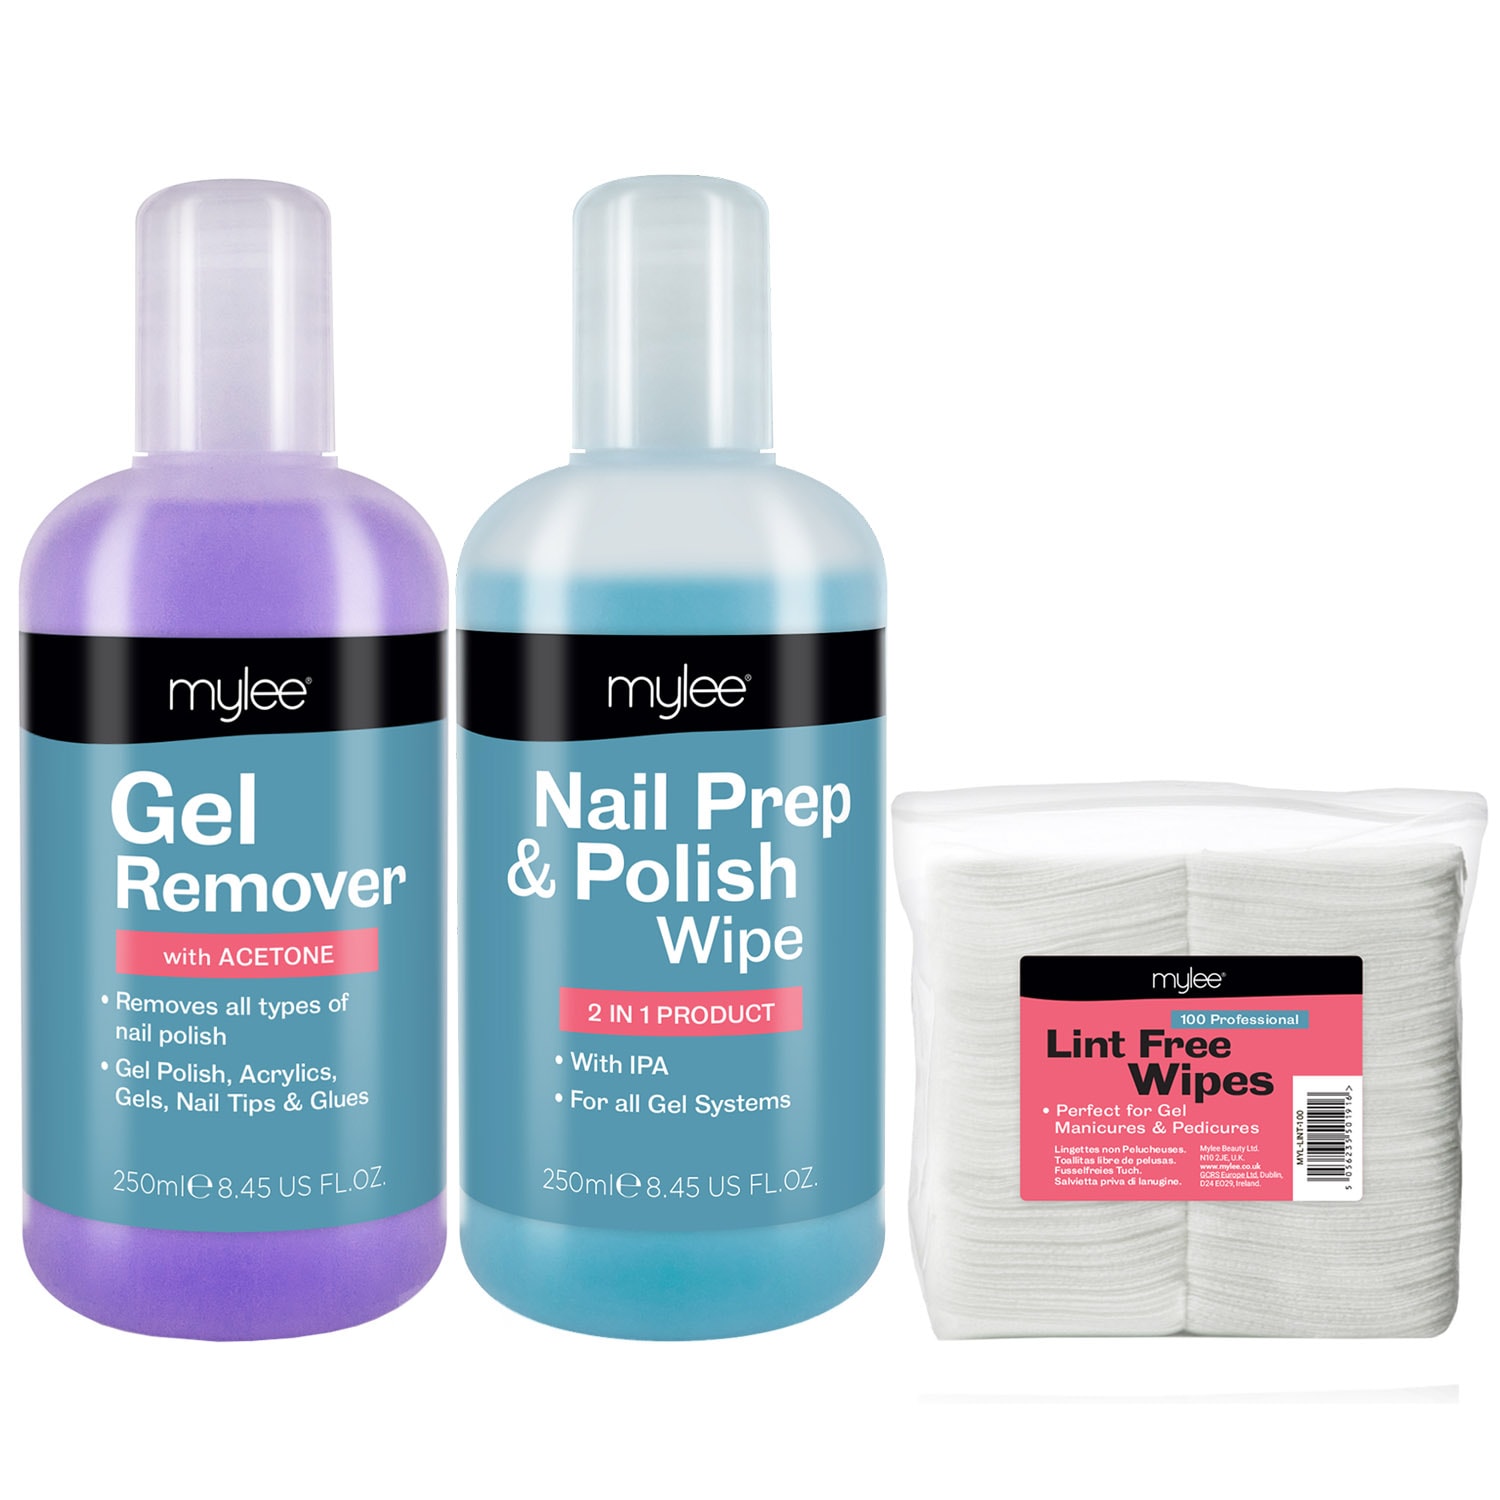 MYLEE Gel Set with Prep & Wipe, remover and lint-free pads